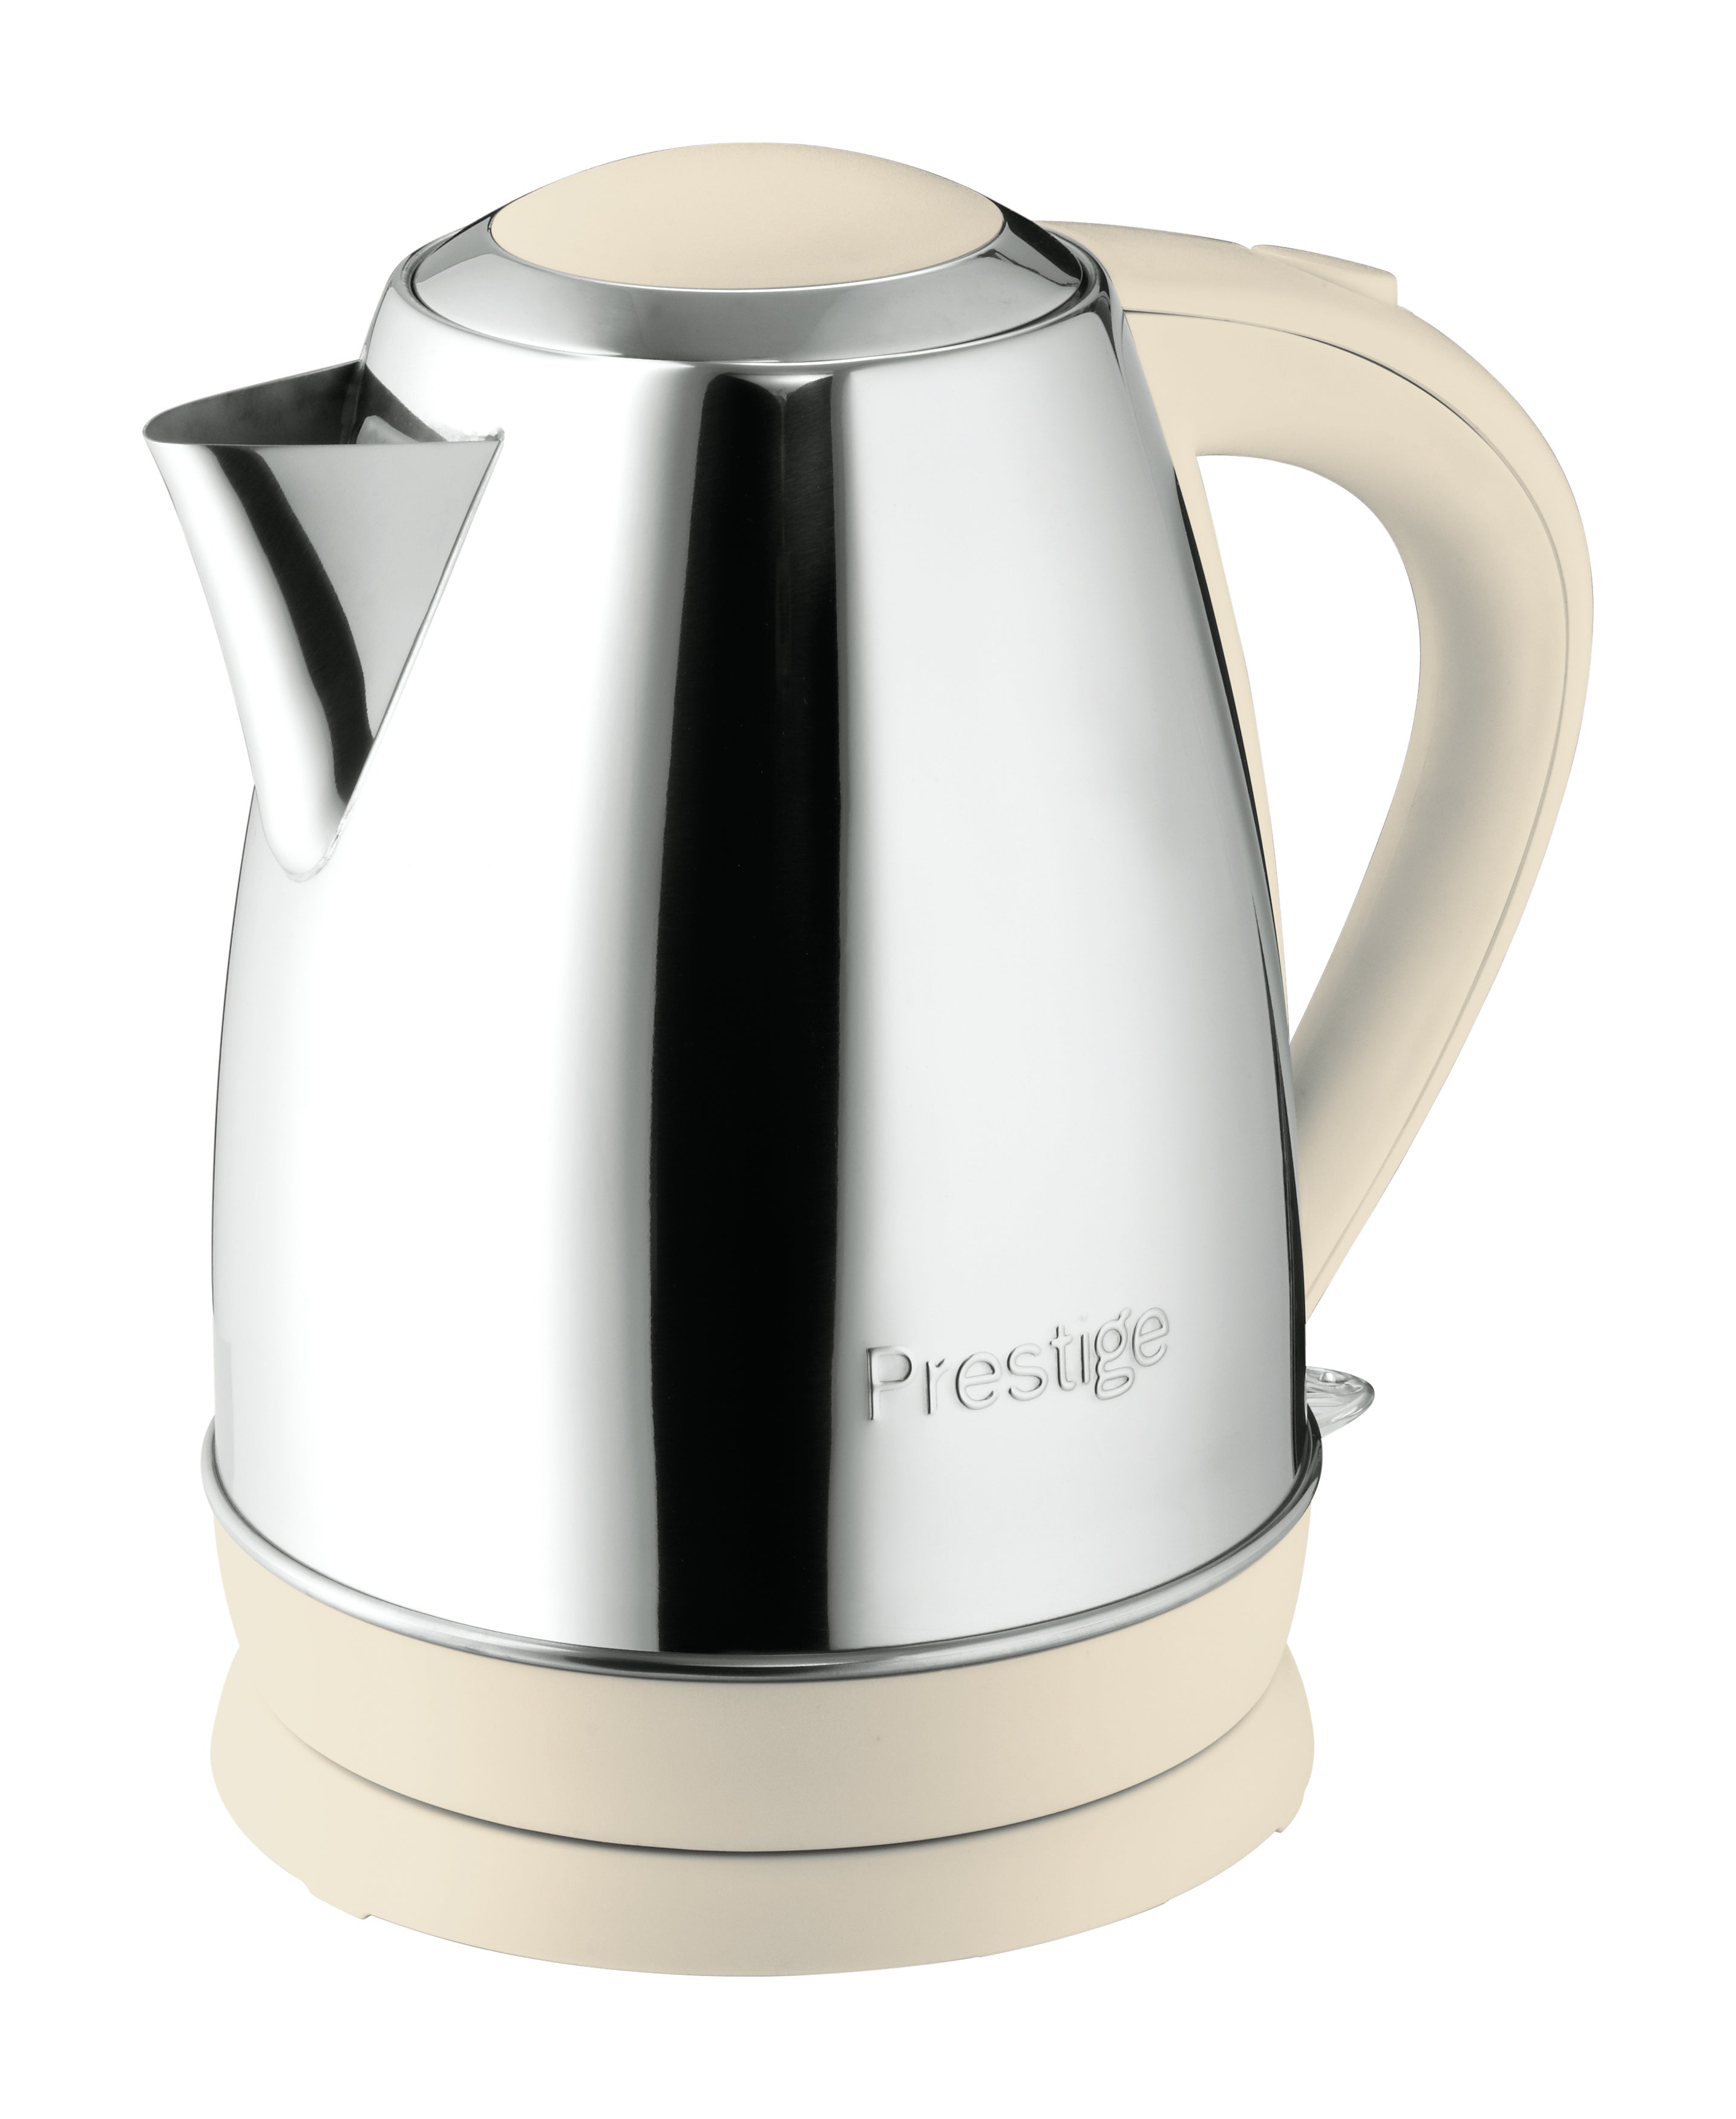 An image of Prestige Electric Kettle and Toaster Sets 2 Piece Set Stainless Steel Cream